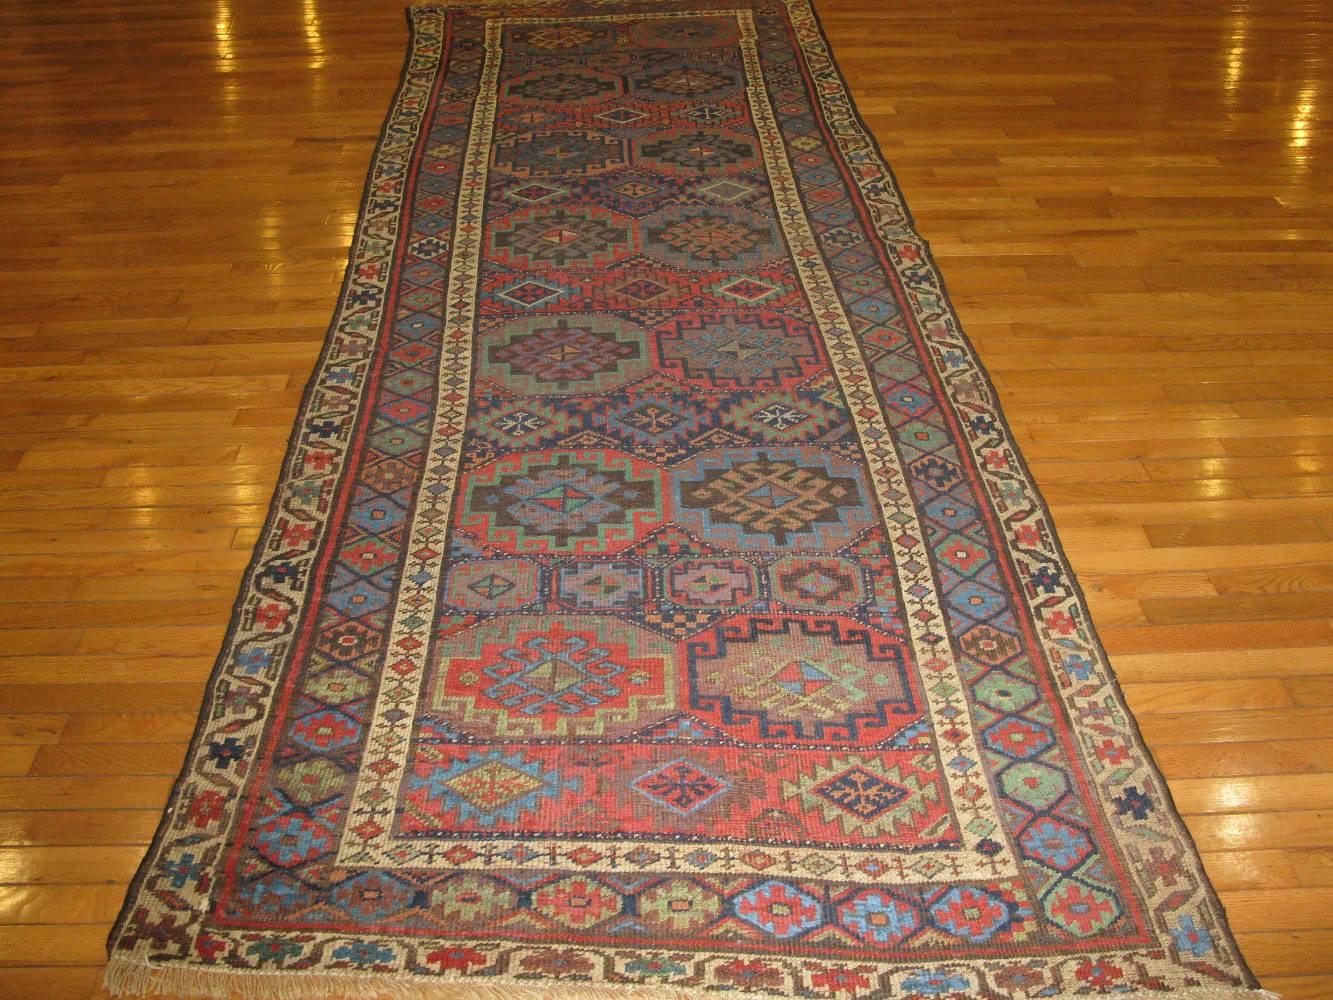 This is a beautiful antique wide and long hand-knotted Persian Kurdish runner rug with a tribal all-over pattern. The rug is made with all wool and natural dyes. 
It measures 4' x 11.7''.